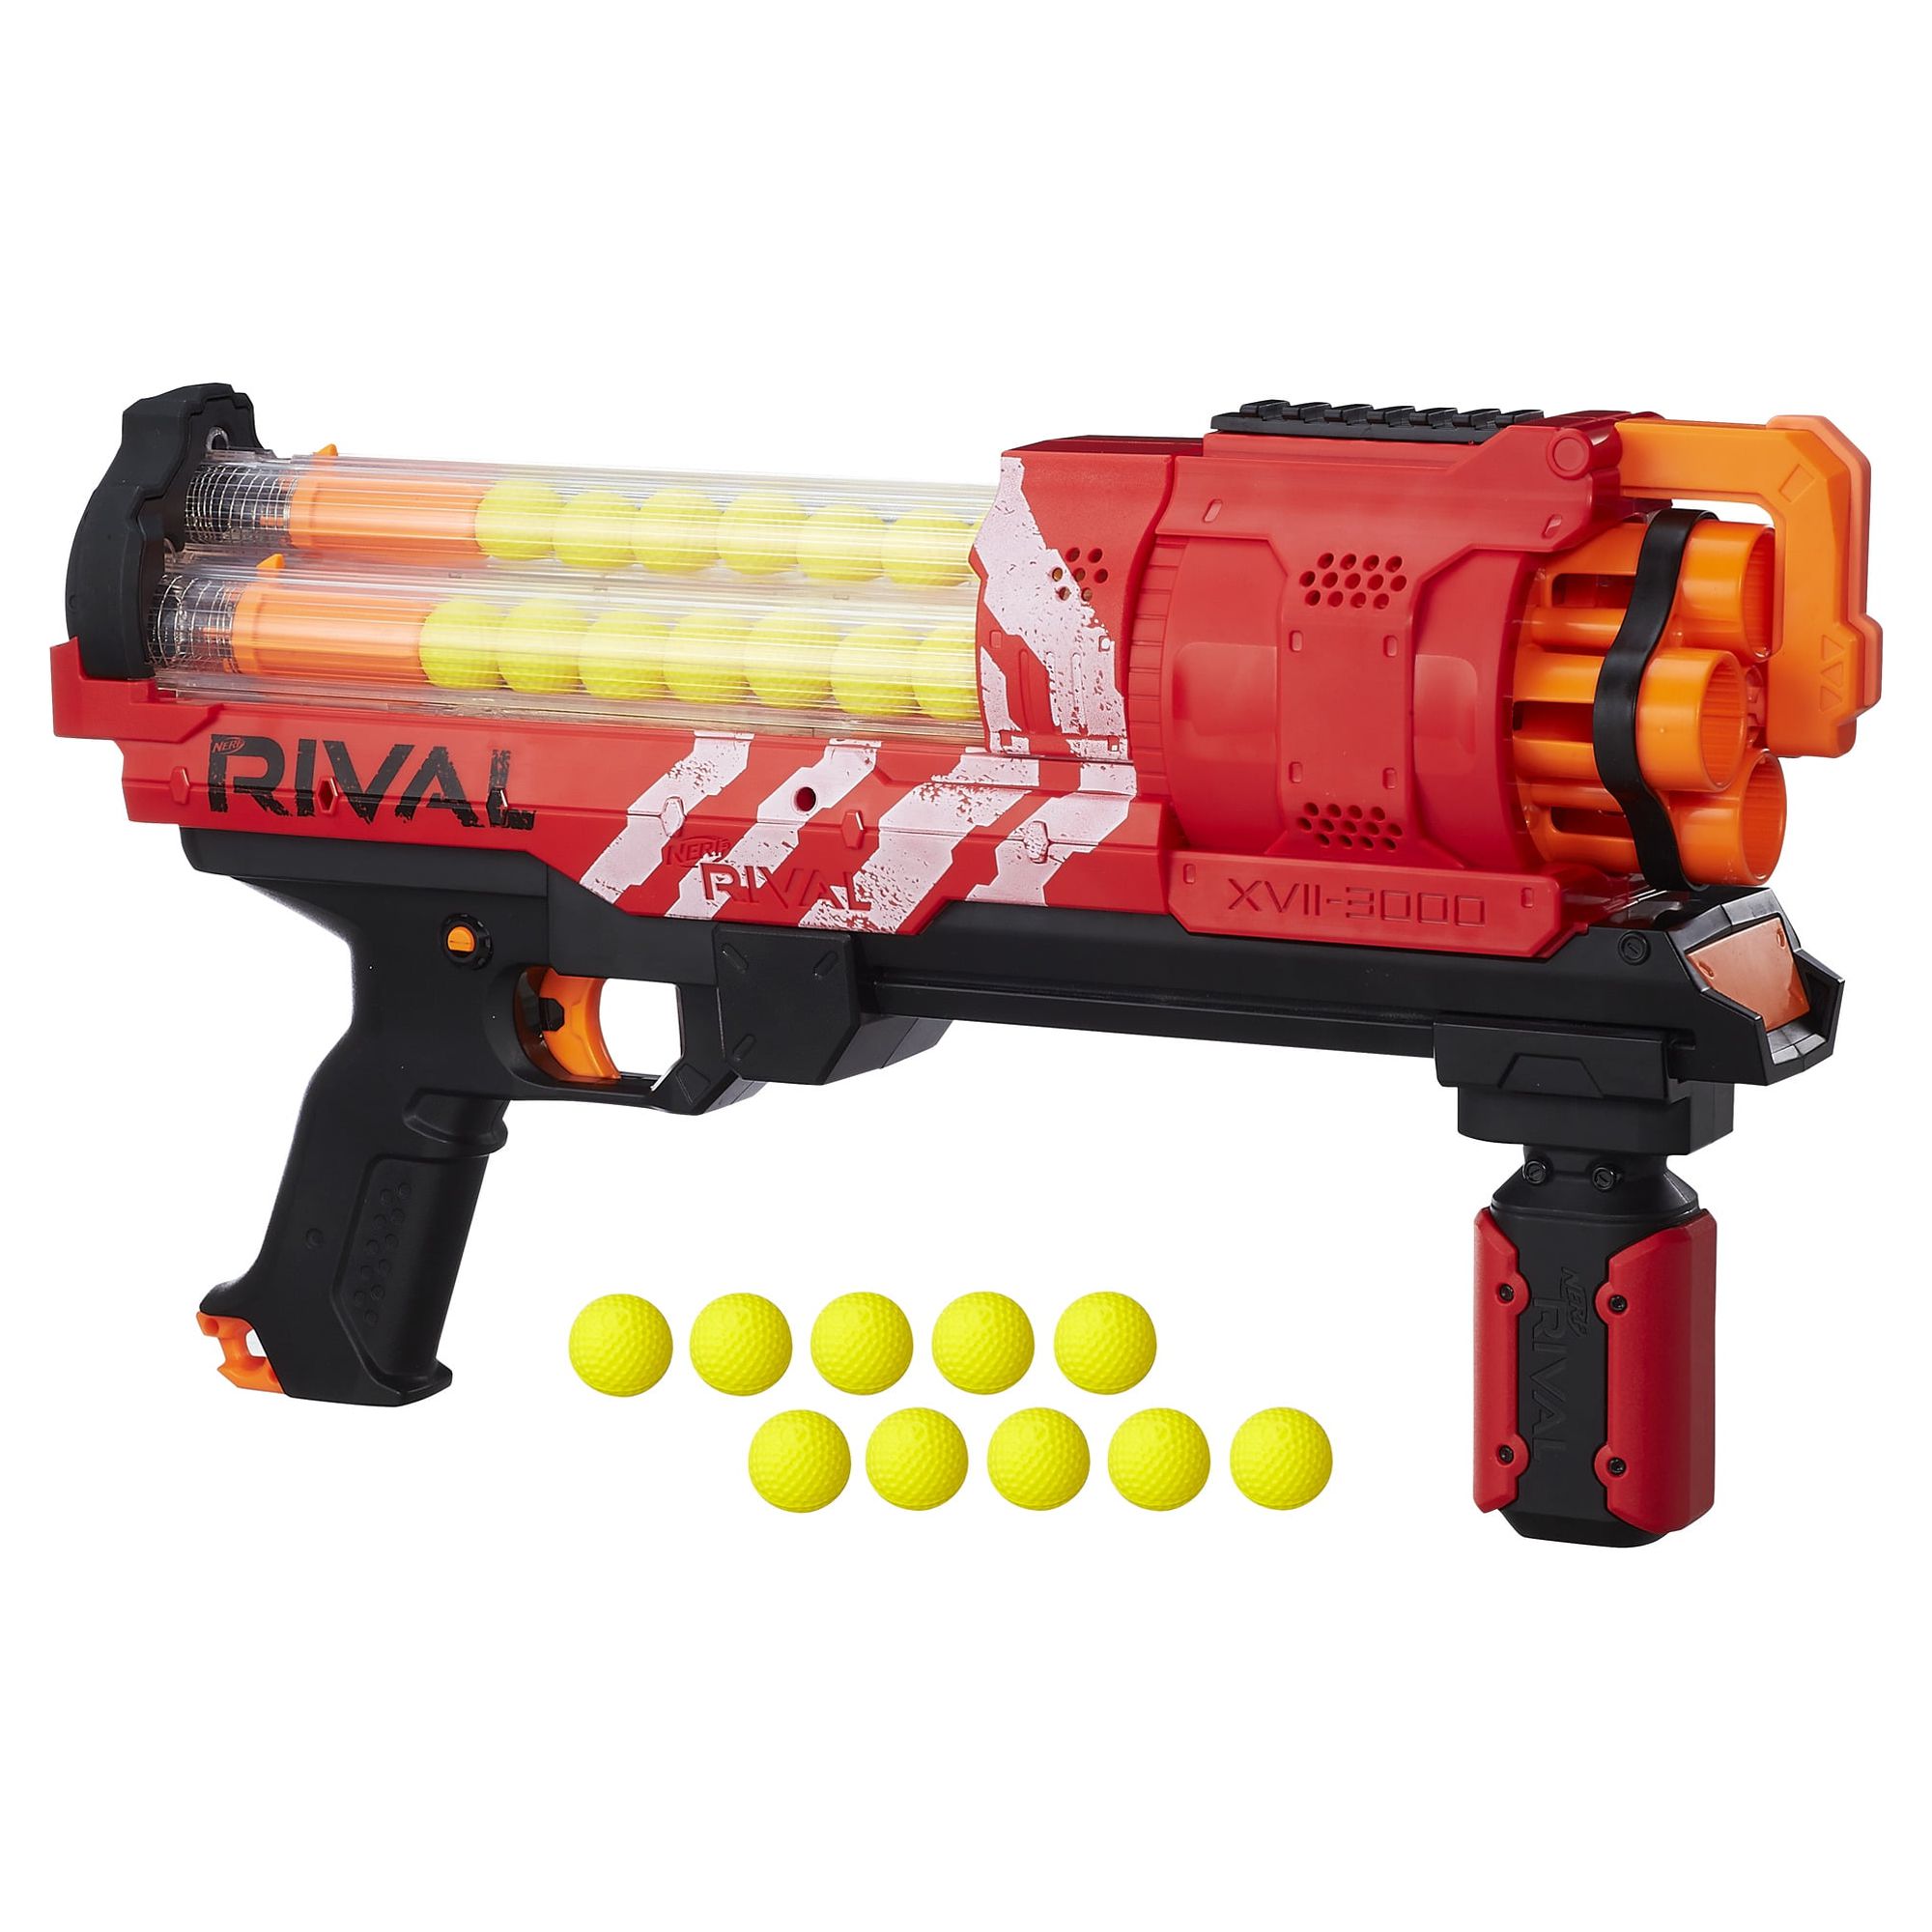 Nerf Rival Artemis XVII 3000 (Red), includes Blaster and 30 Rounds - image 1 of 2